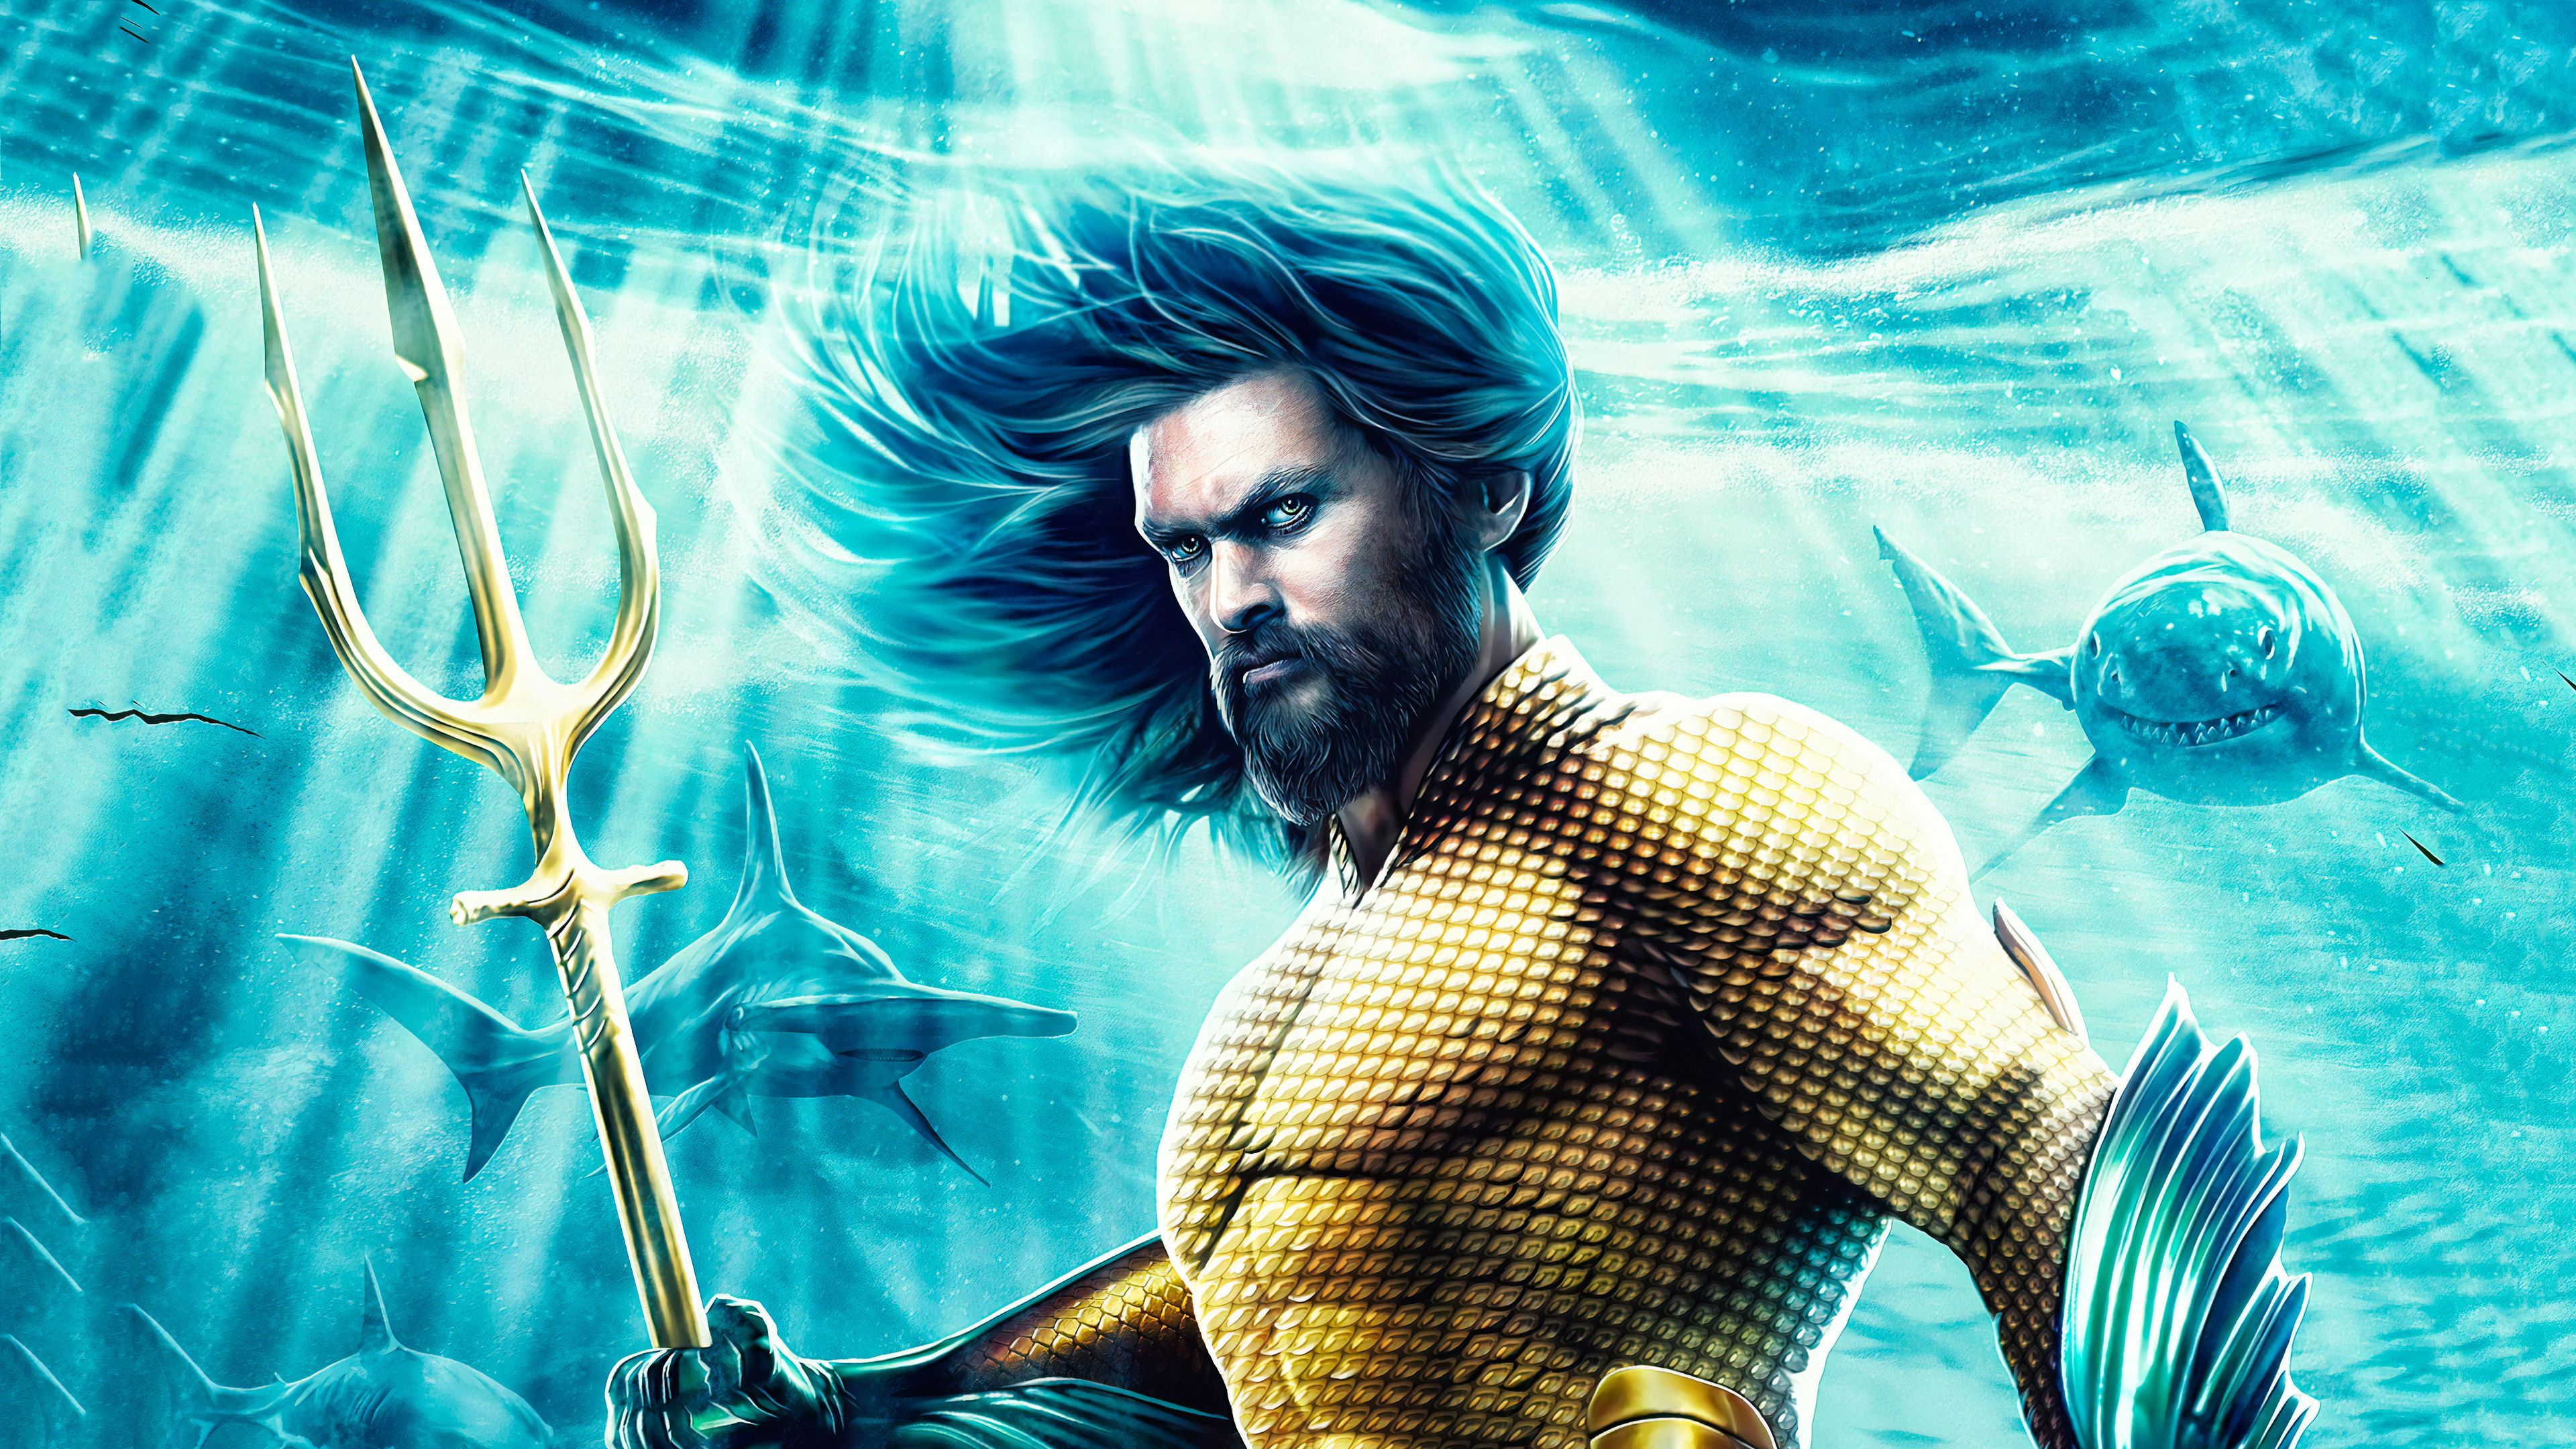 Aquaman Trident Wallpapers 4k Hd Aquaman Trident Backgrounds On